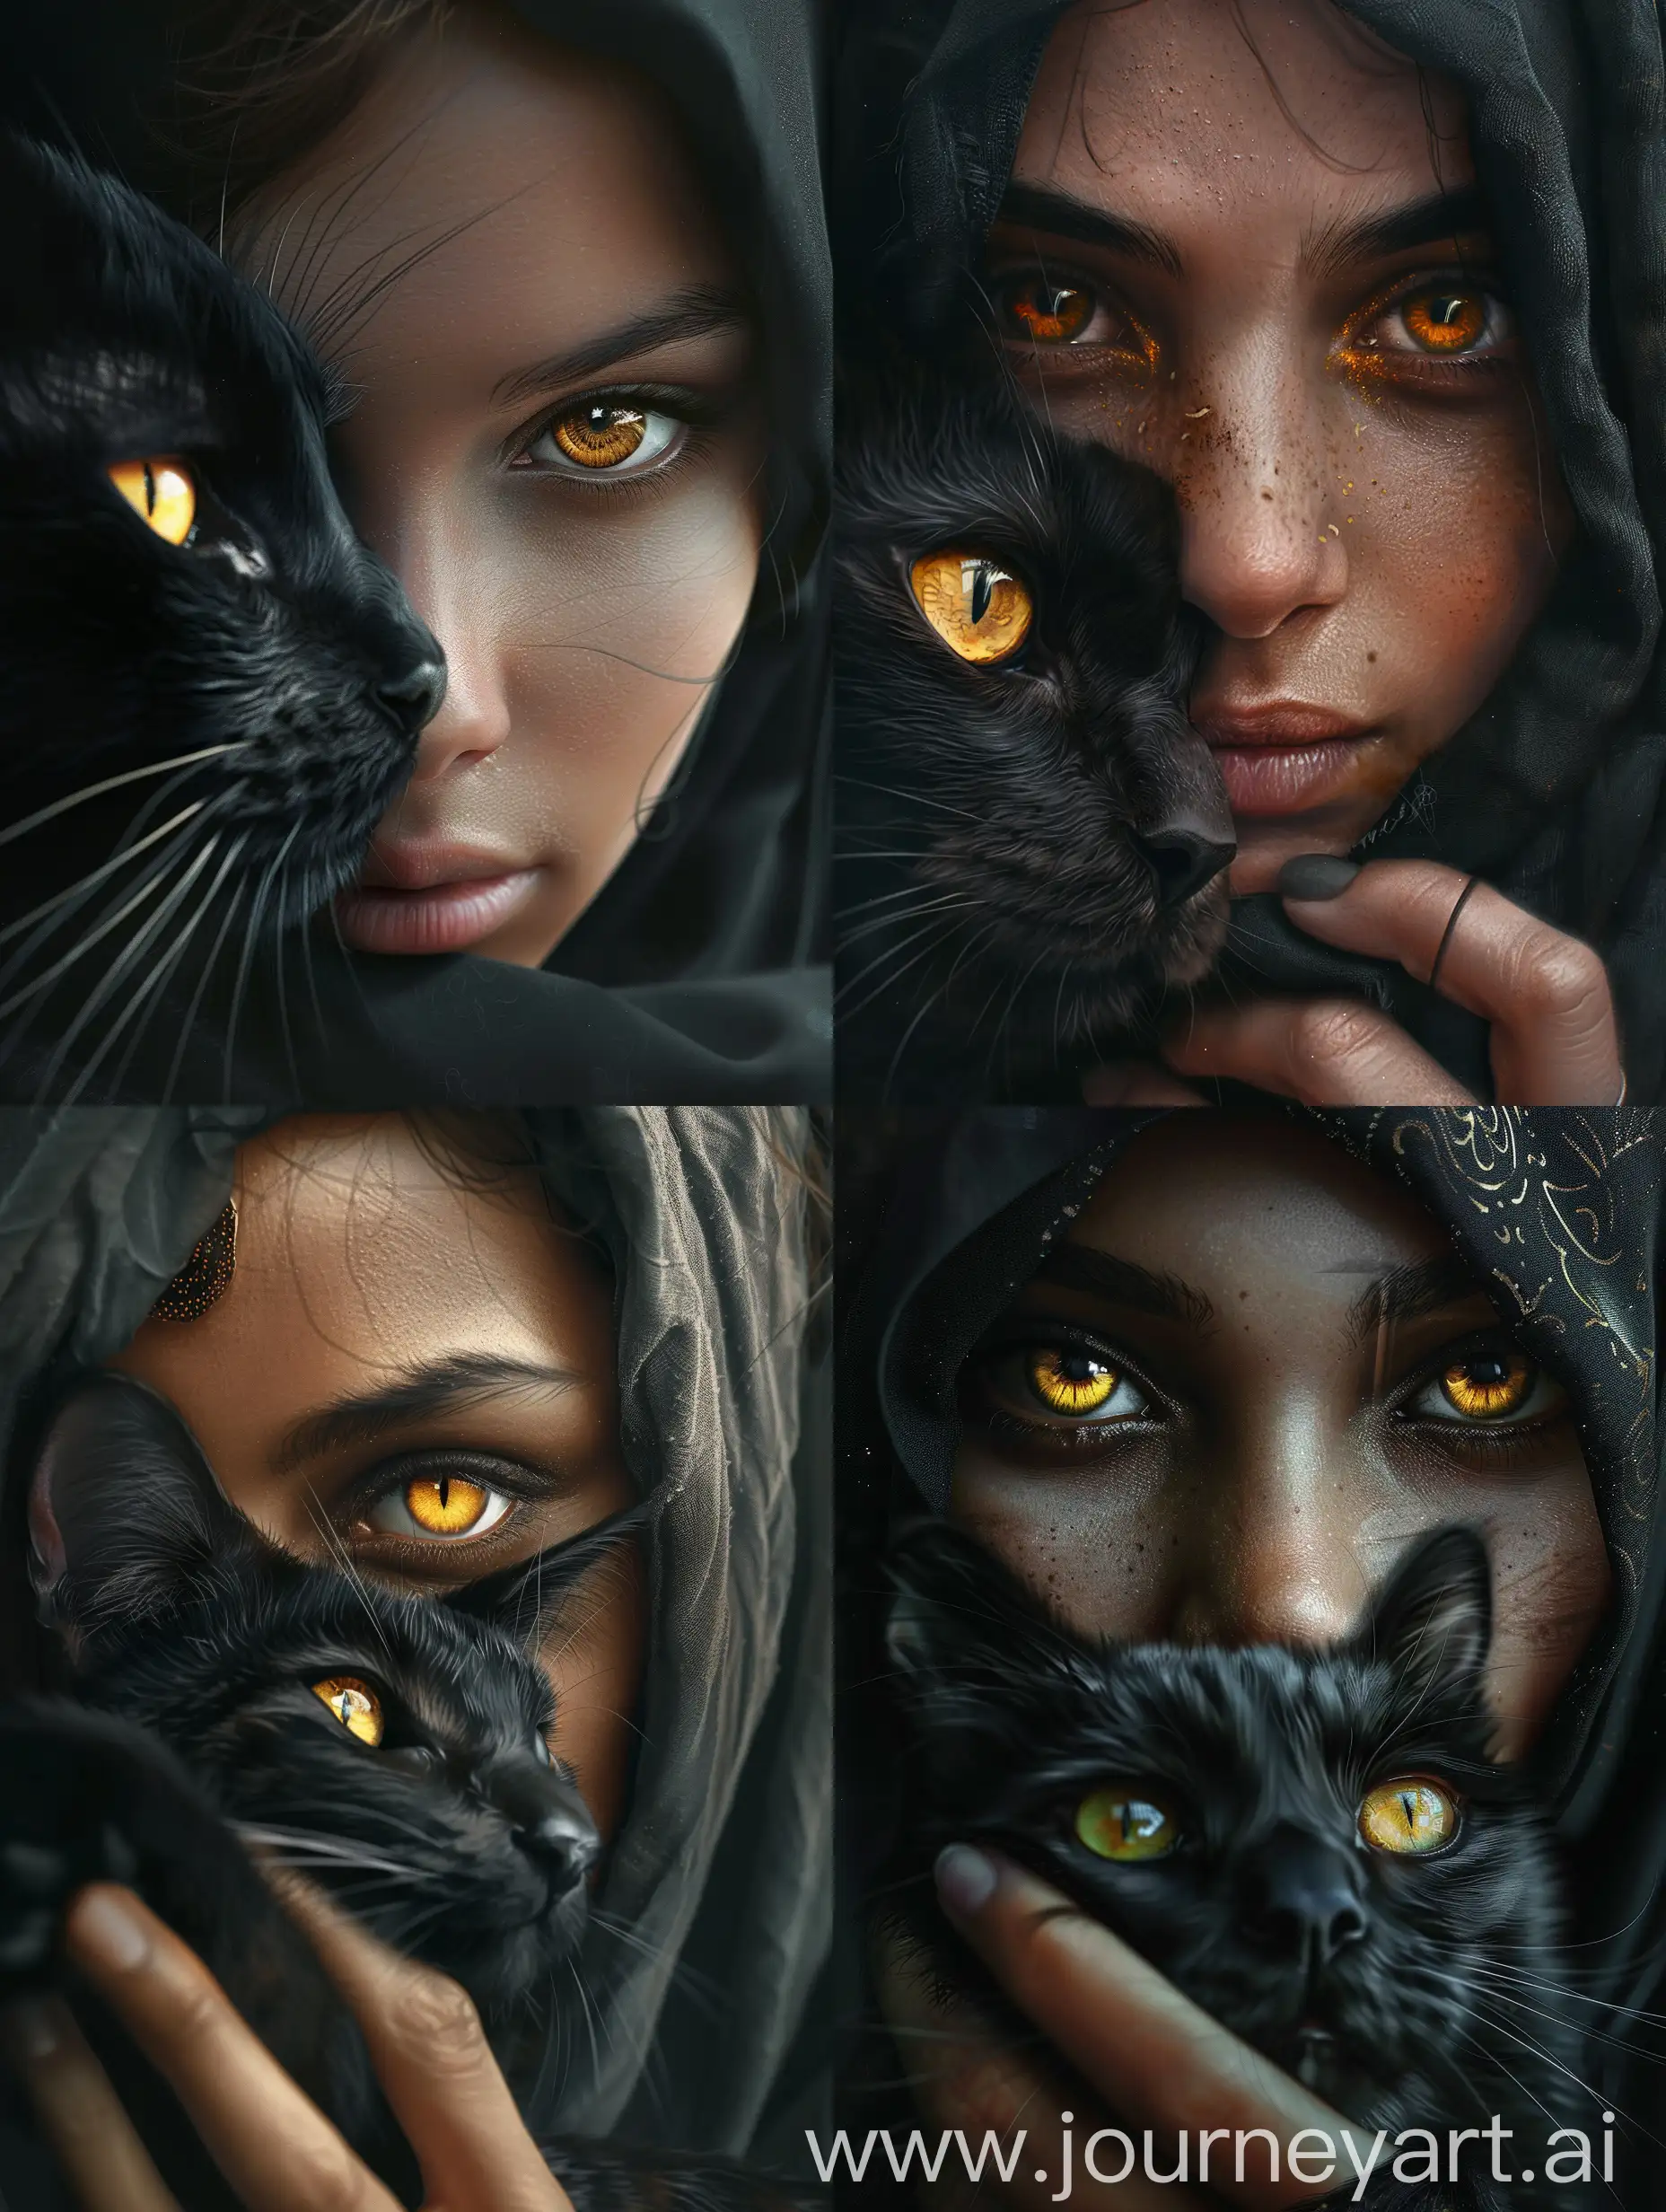 Close-up portrait of a young woman hijab, holding a black cat in front of her face, both having striking yellow eyes, intimate and mysterious atmosphere, inspired by contemporary portrait photography, soft lighting, detailed textures, realistic shading, capturing the bond between the woman and her cat, emphasizing the contrast between their dark features and the bright eyes, highly detailed, realistic skin and fur textures